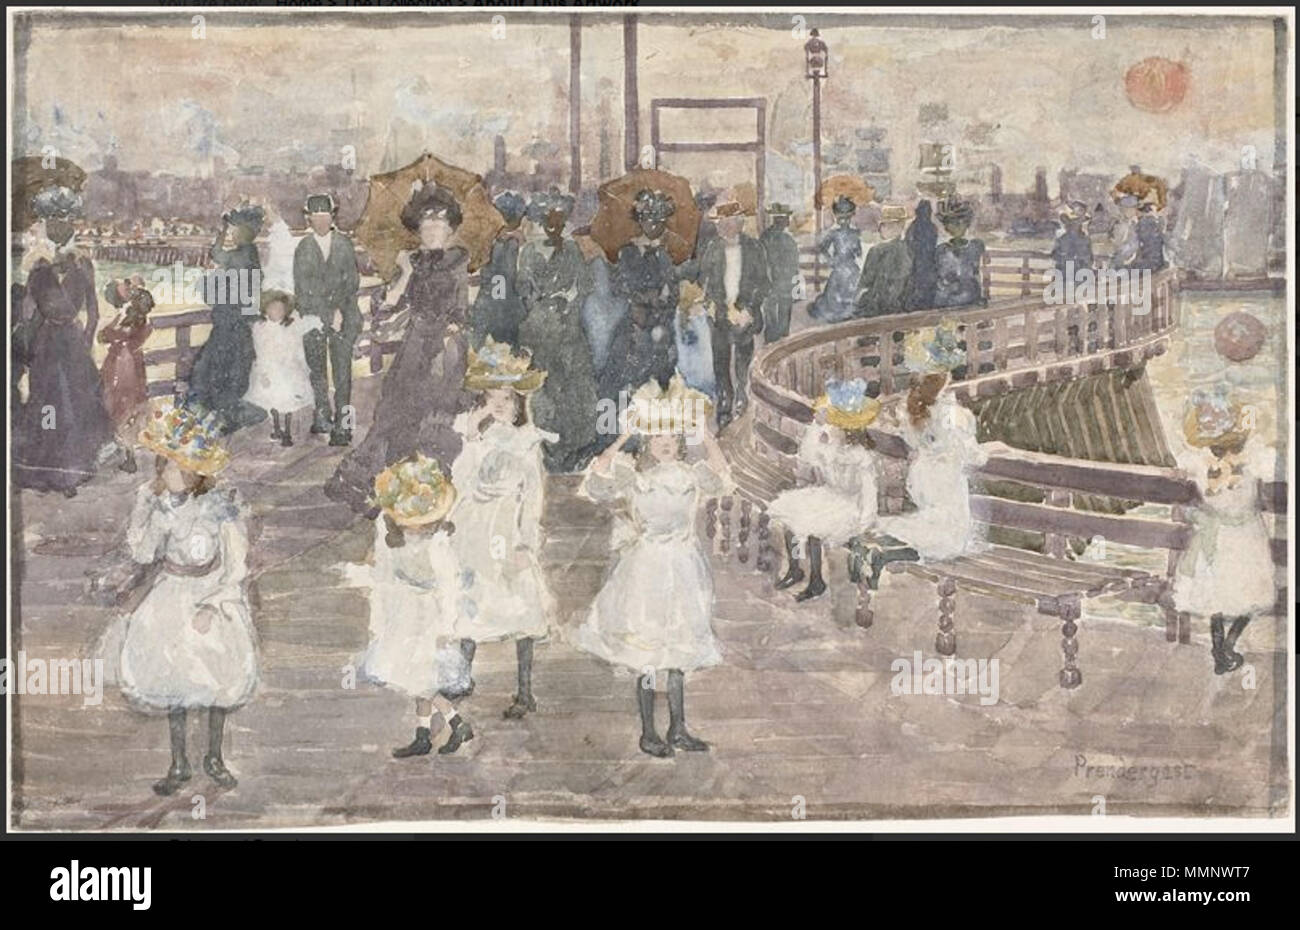 . South Boston Pier, c. 1898. By Maurice Brazil Prendergast. Watercolor over graphite, with traces of white gouache, on ivory wove paper. Art Institute of Chicago. 11 1898 SouthBostonPier byPrendergast ARTIC Stock Photo